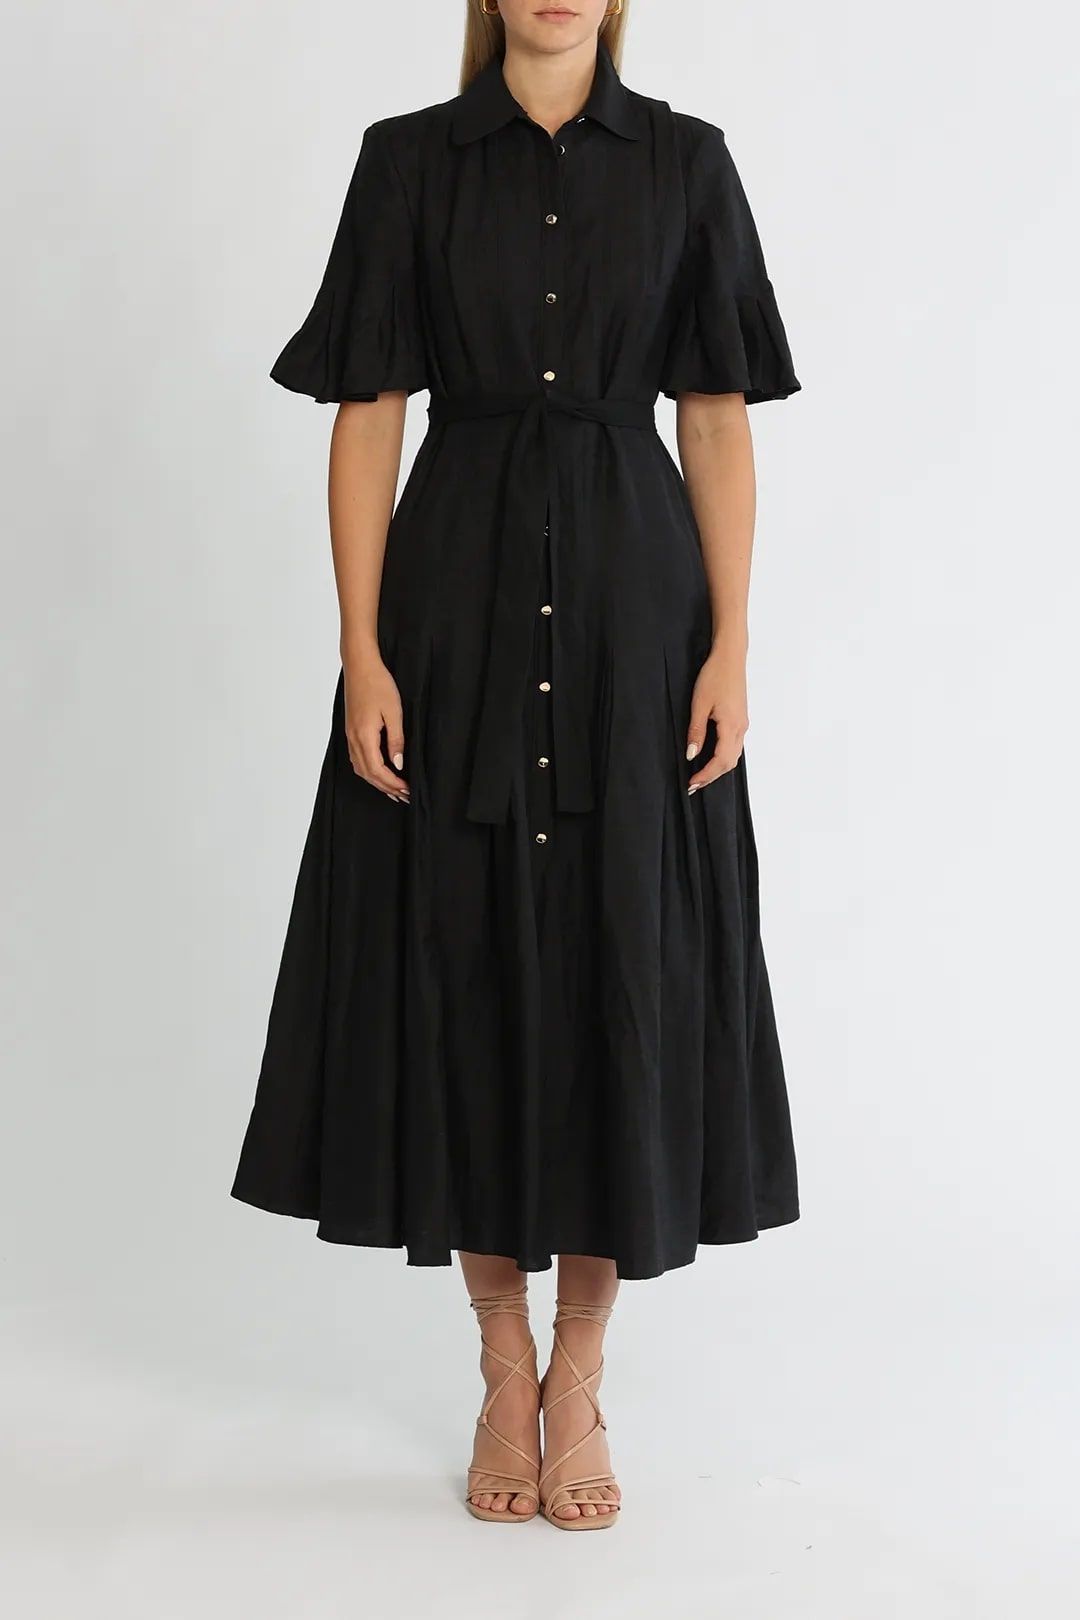 Hire Lockwood dress in black for evening events.